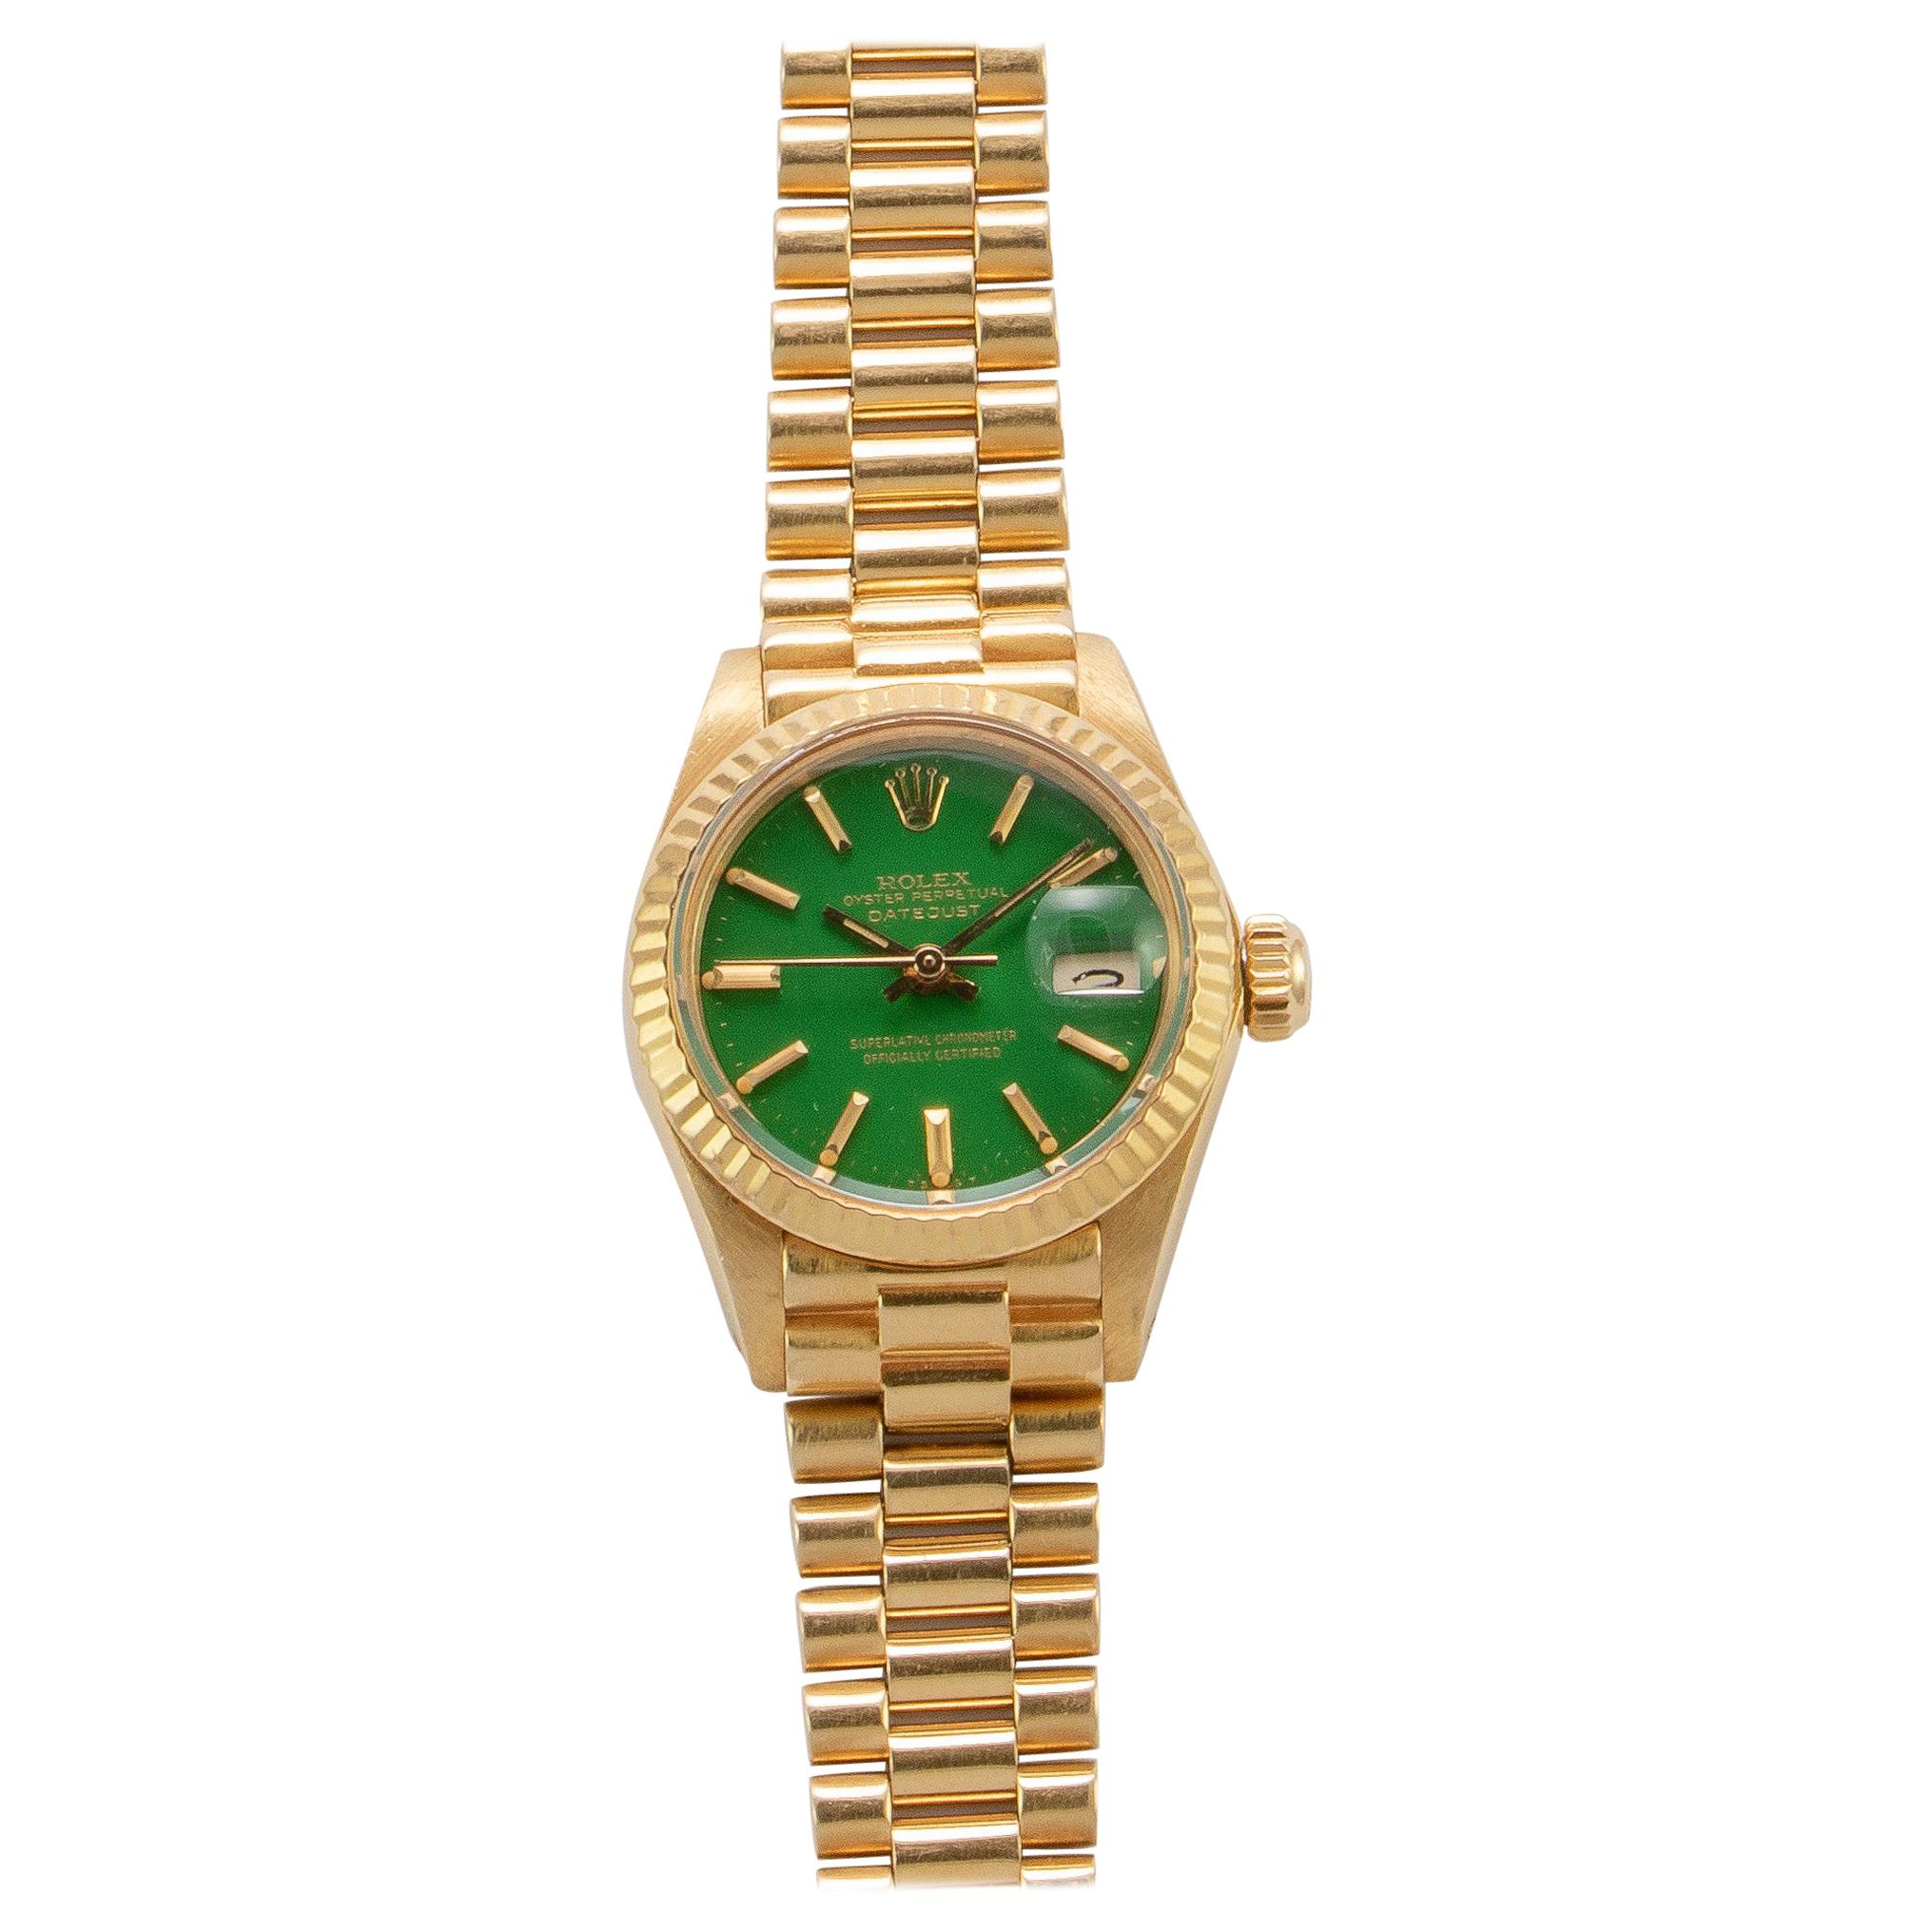 Rolex 18 Karat Gold Ladies Oyster Perpetual Datejust with Green Stella Dial